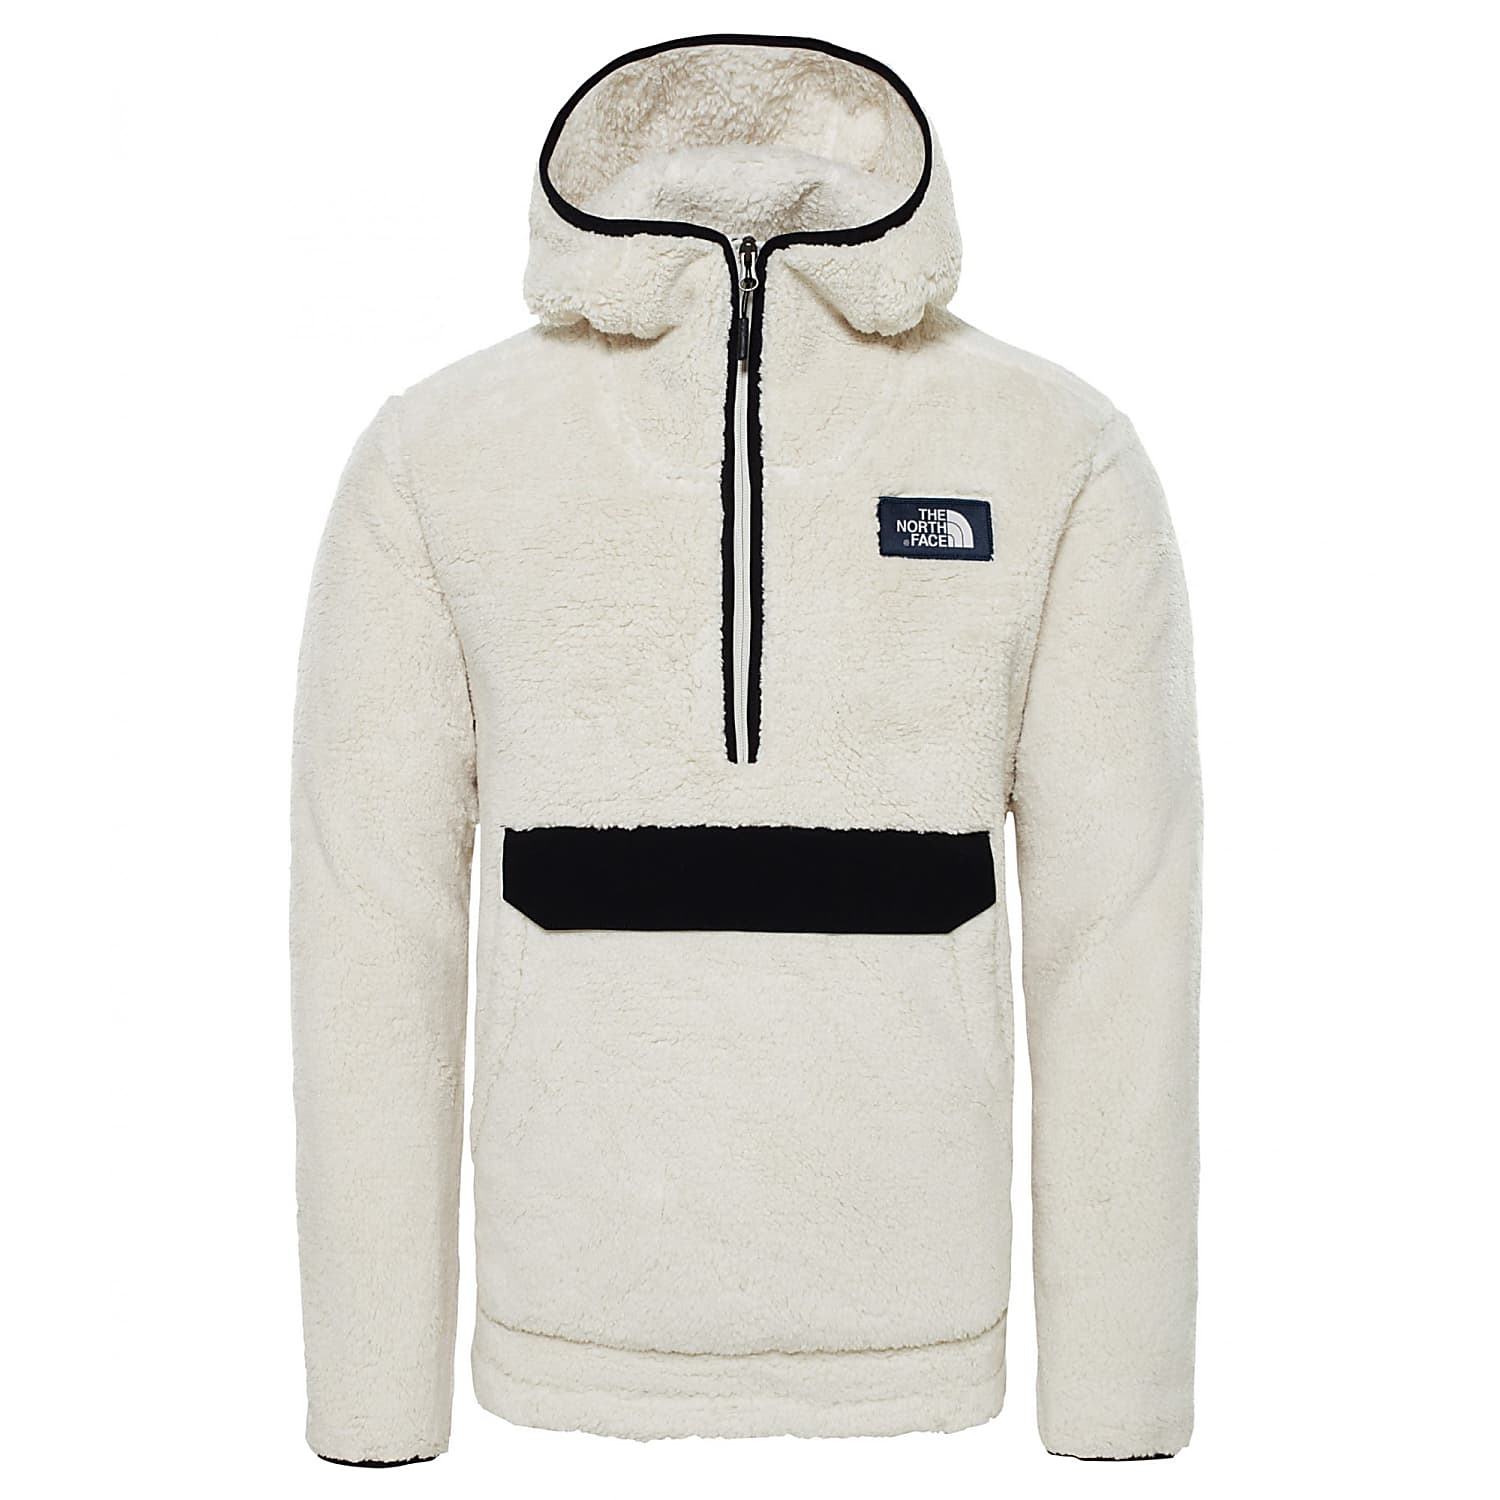 m campshire pullover hoodie